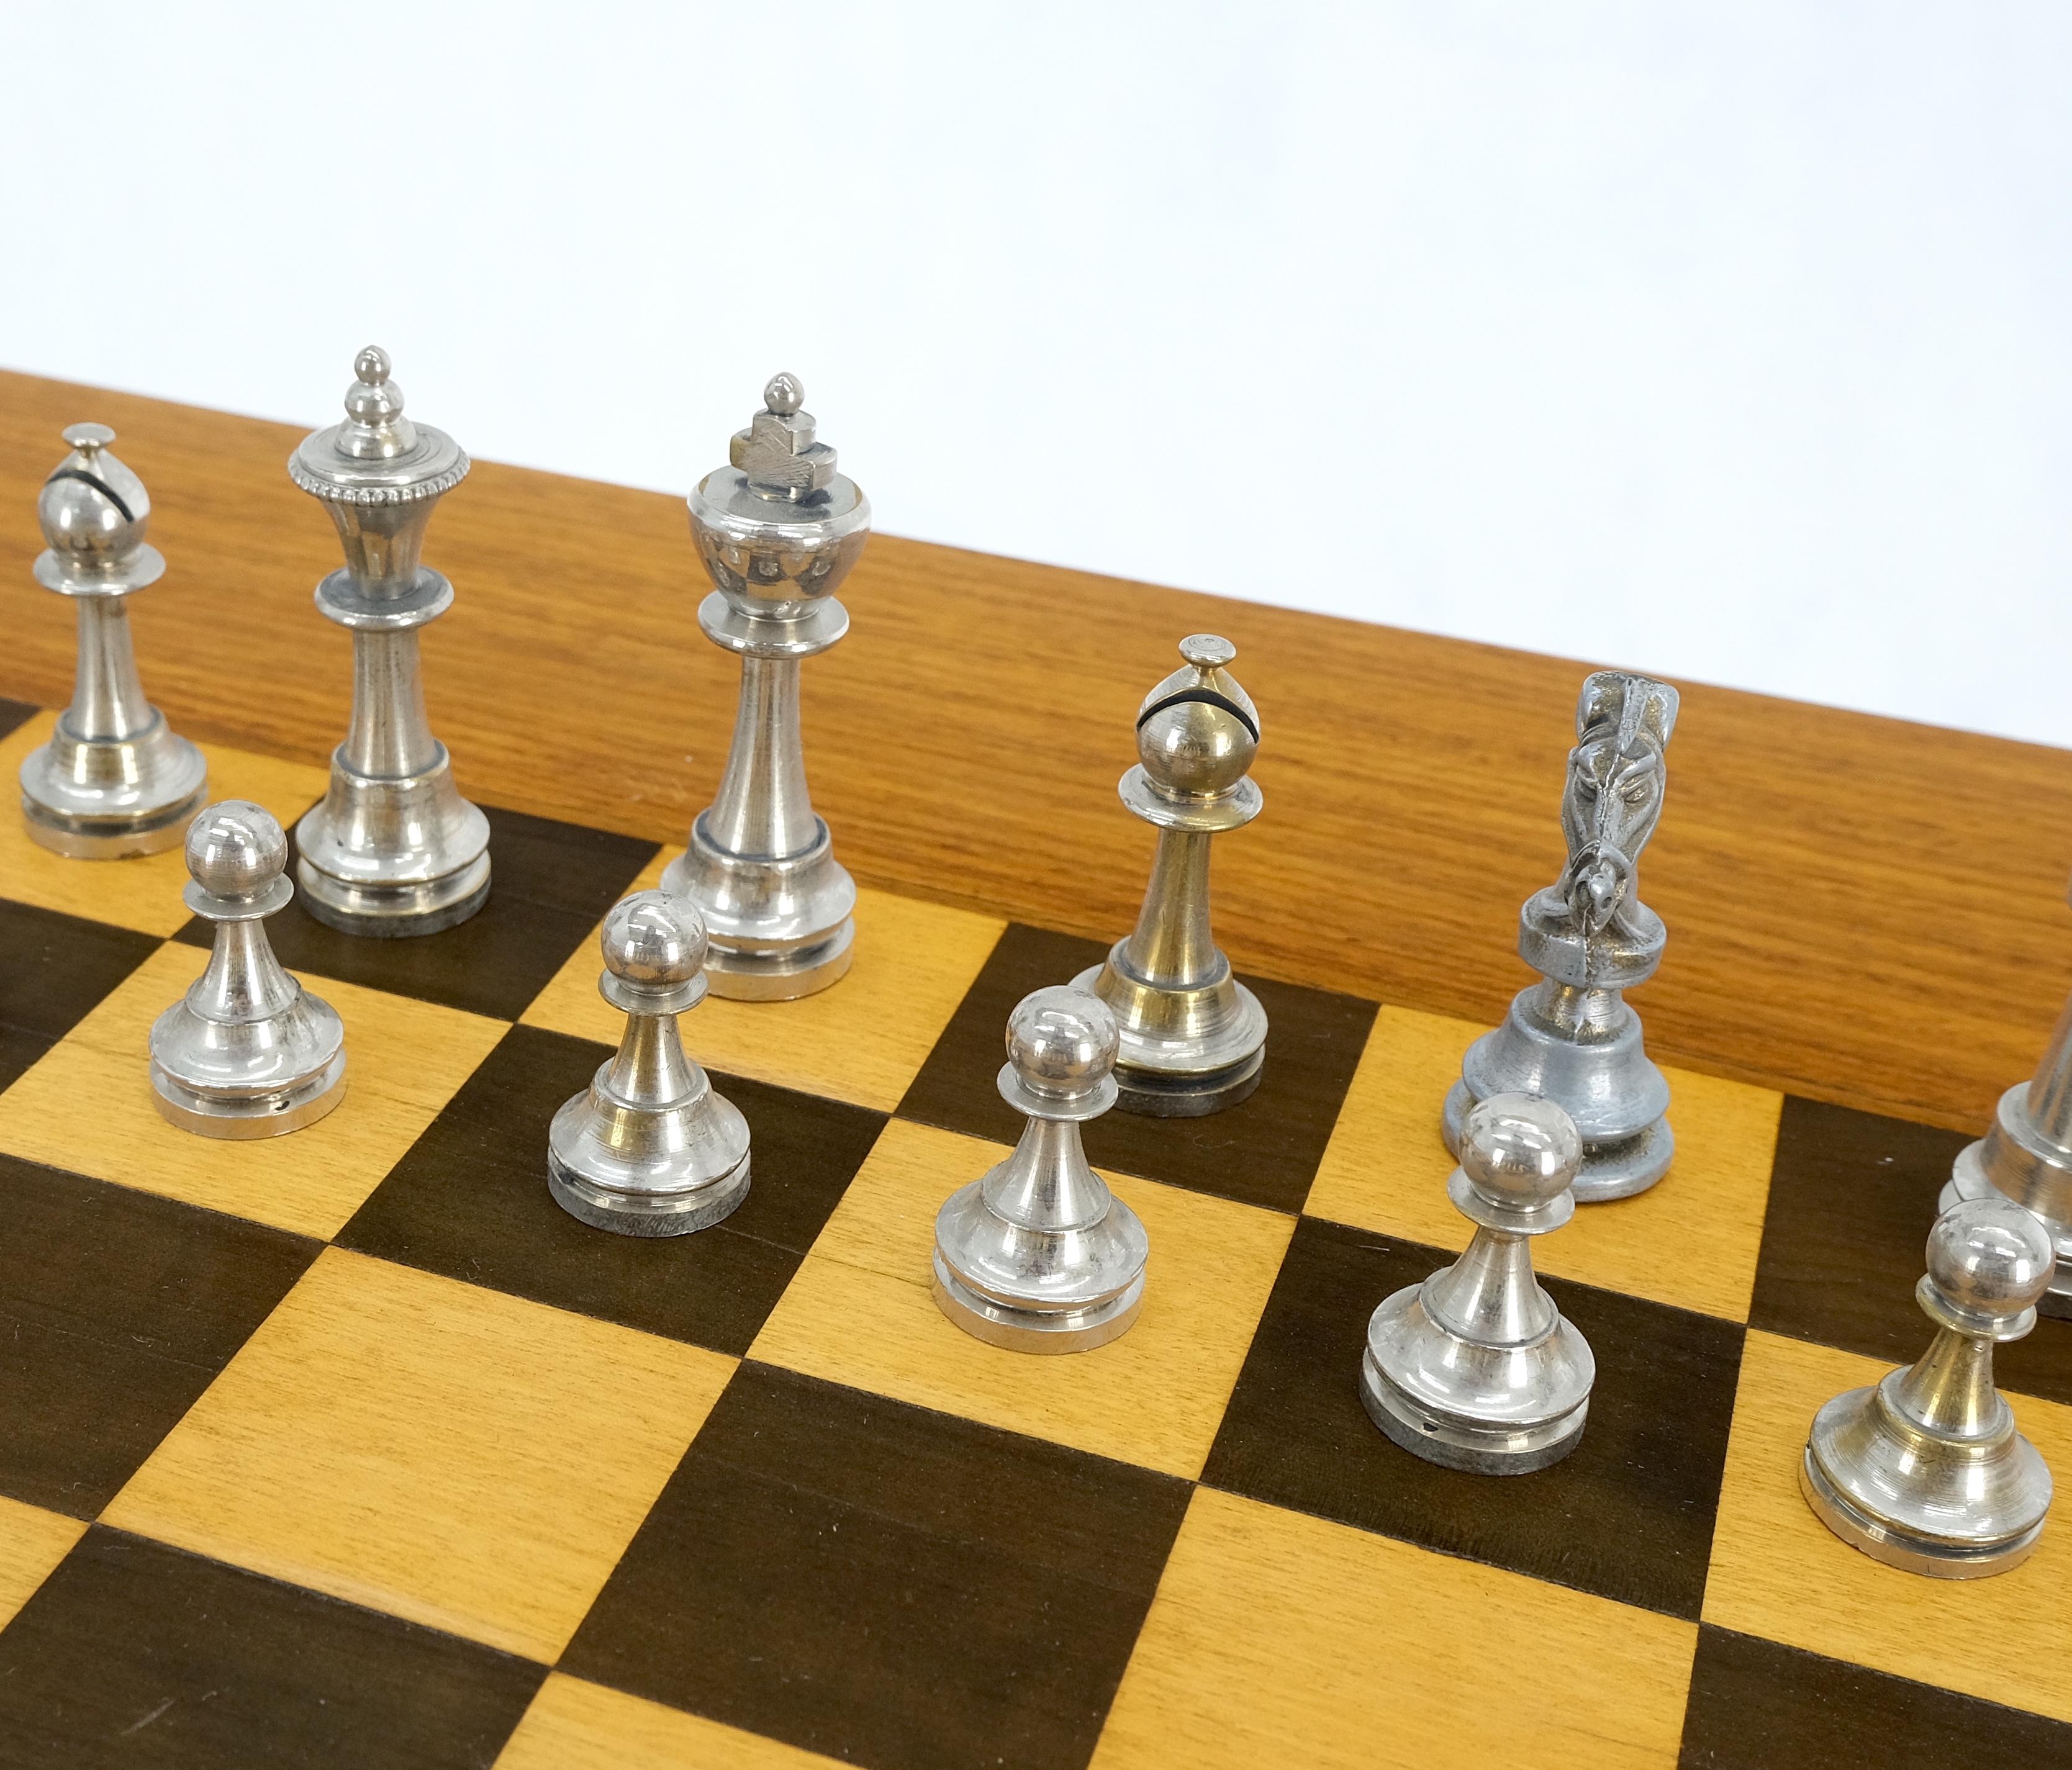 chess table set up